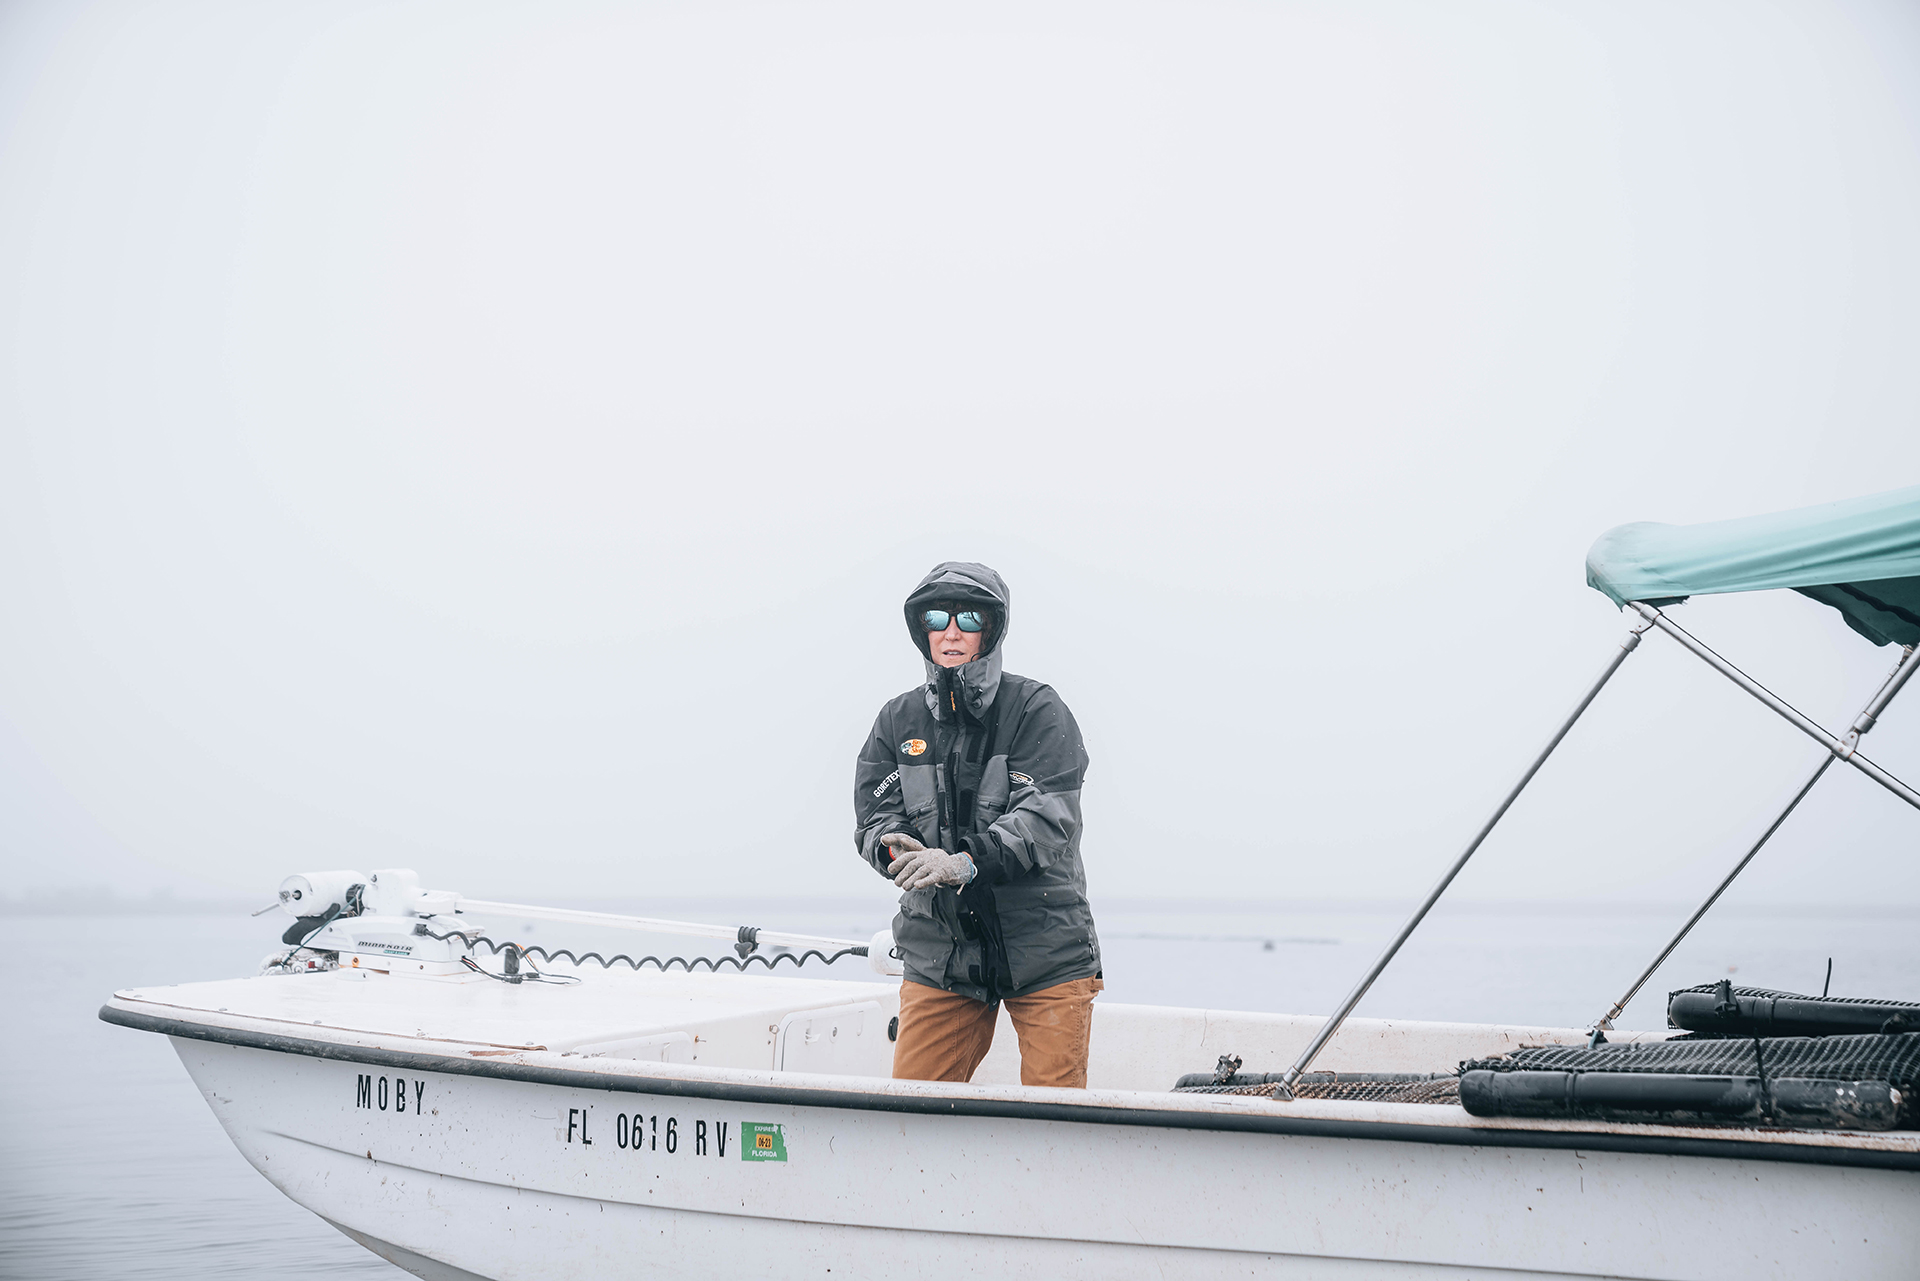 Most mornings, Jody and the crew start their day as the sun is about to come up. On this particular morning, a thick fog hangs low over the water. and the temperature is especially cold for North Florida. The first order of business is heading out to check the oysters and pull any from the water that have grown and are ready to be resorted or sent to market.